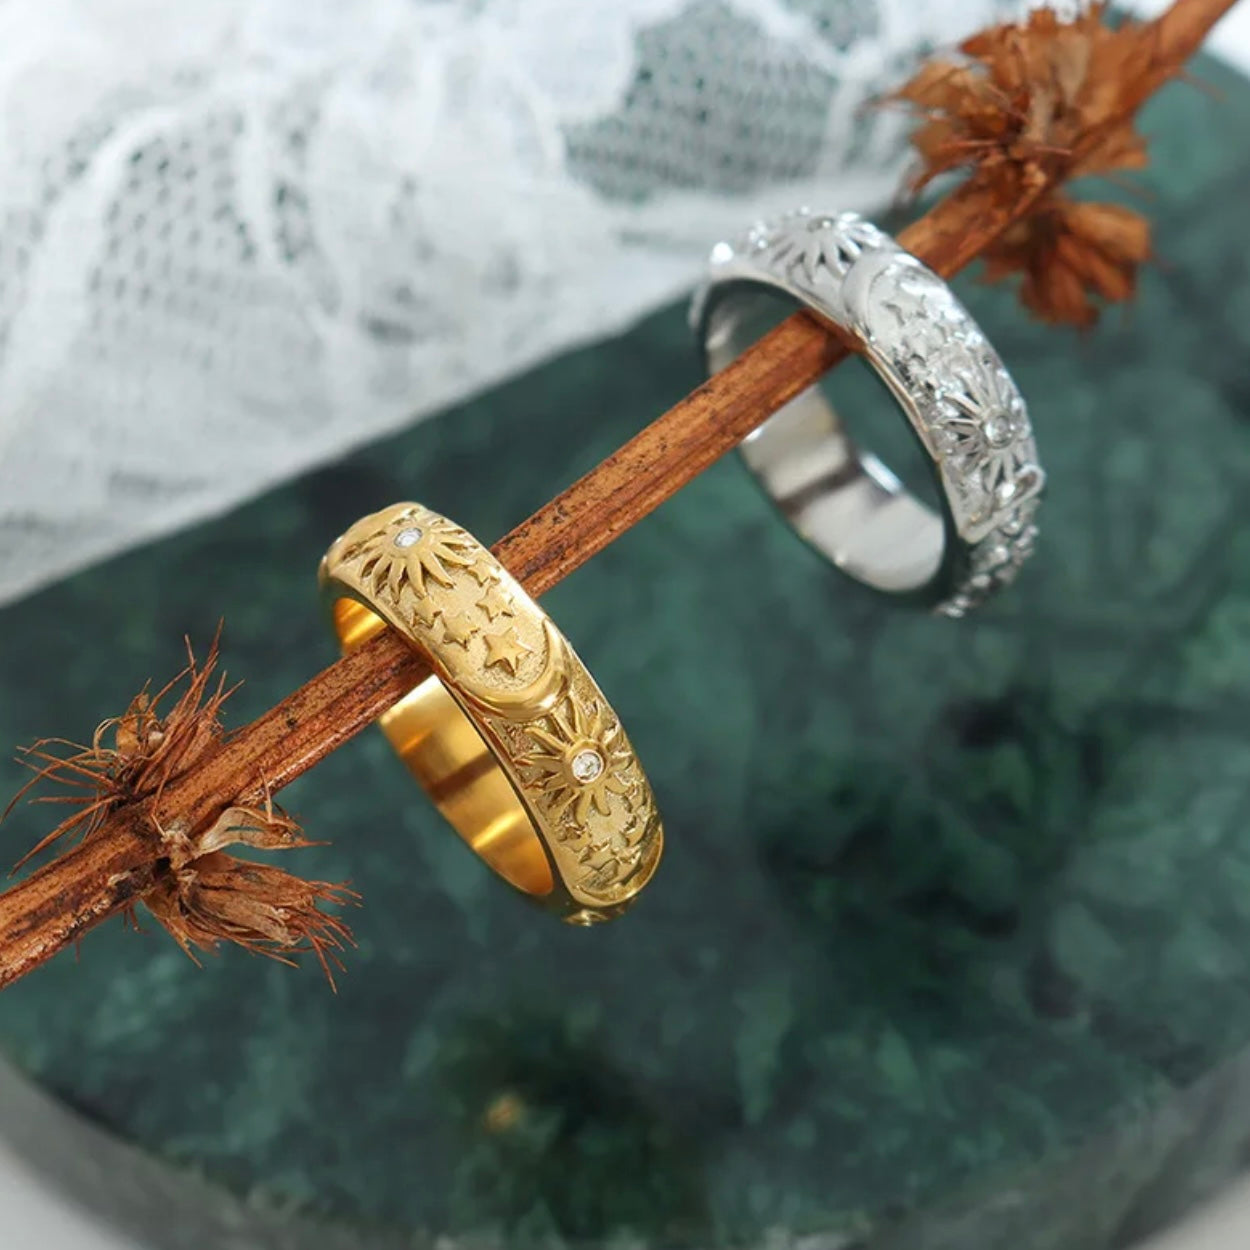 Moon and Stars Ring Gold (8)